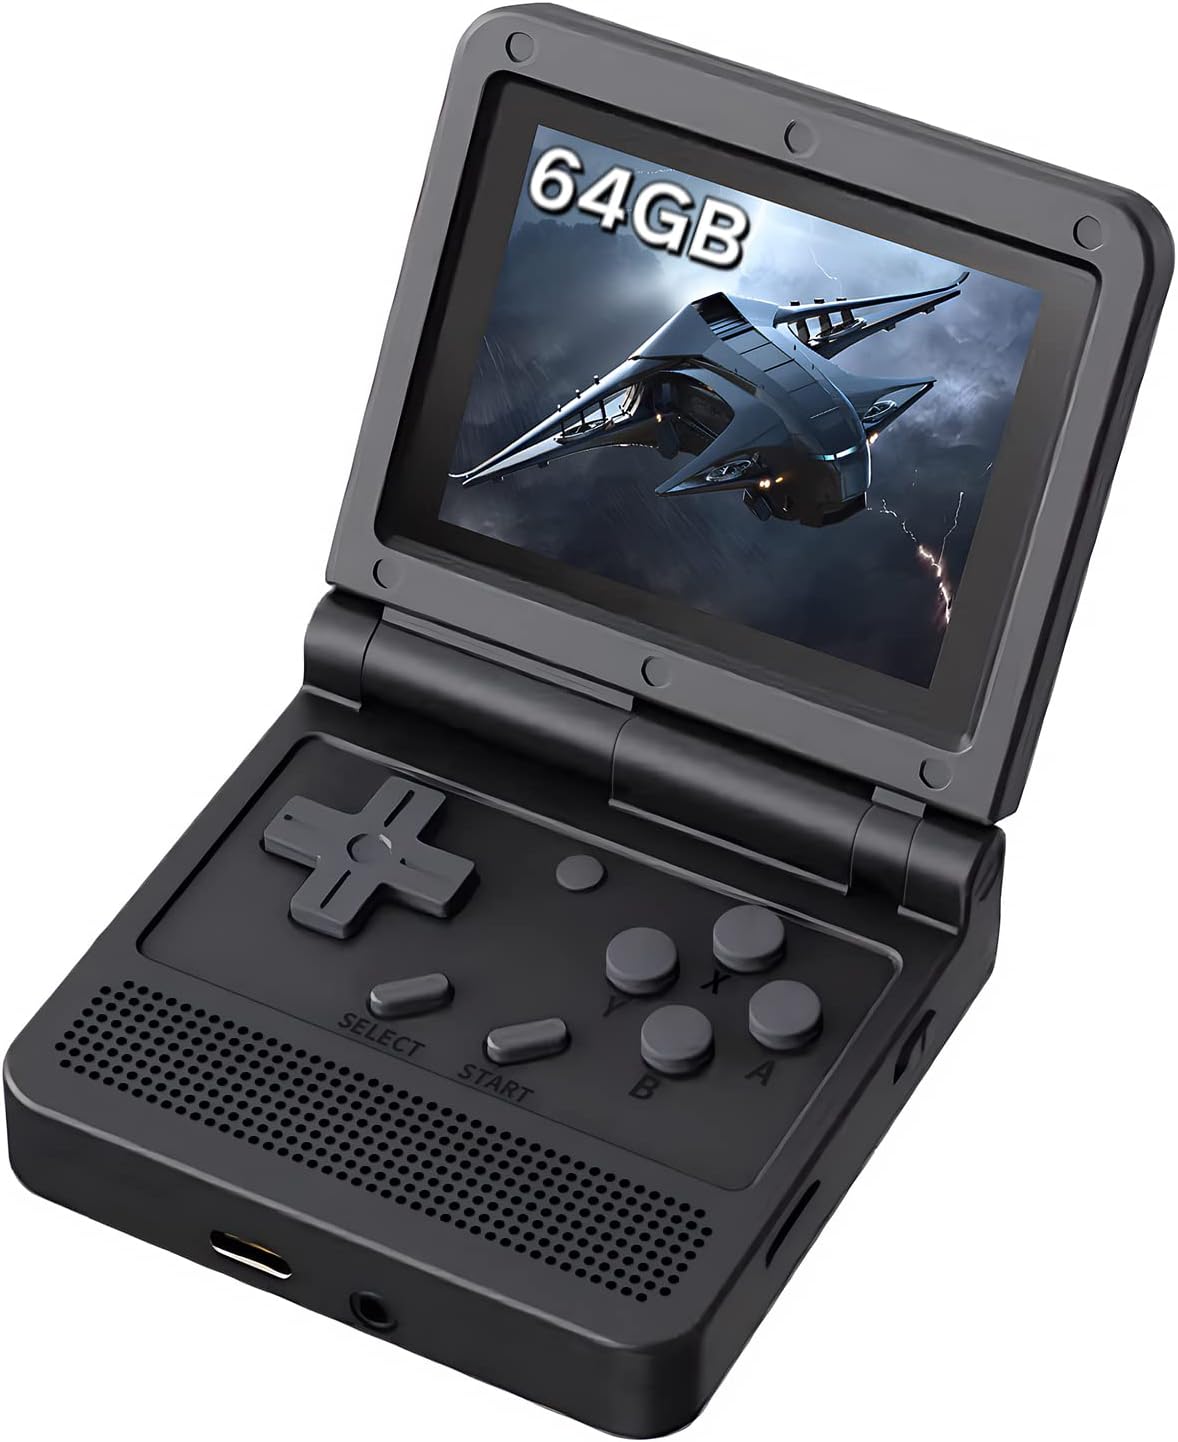 Retro Handheld Game Console 3 inch IPS Screen Review